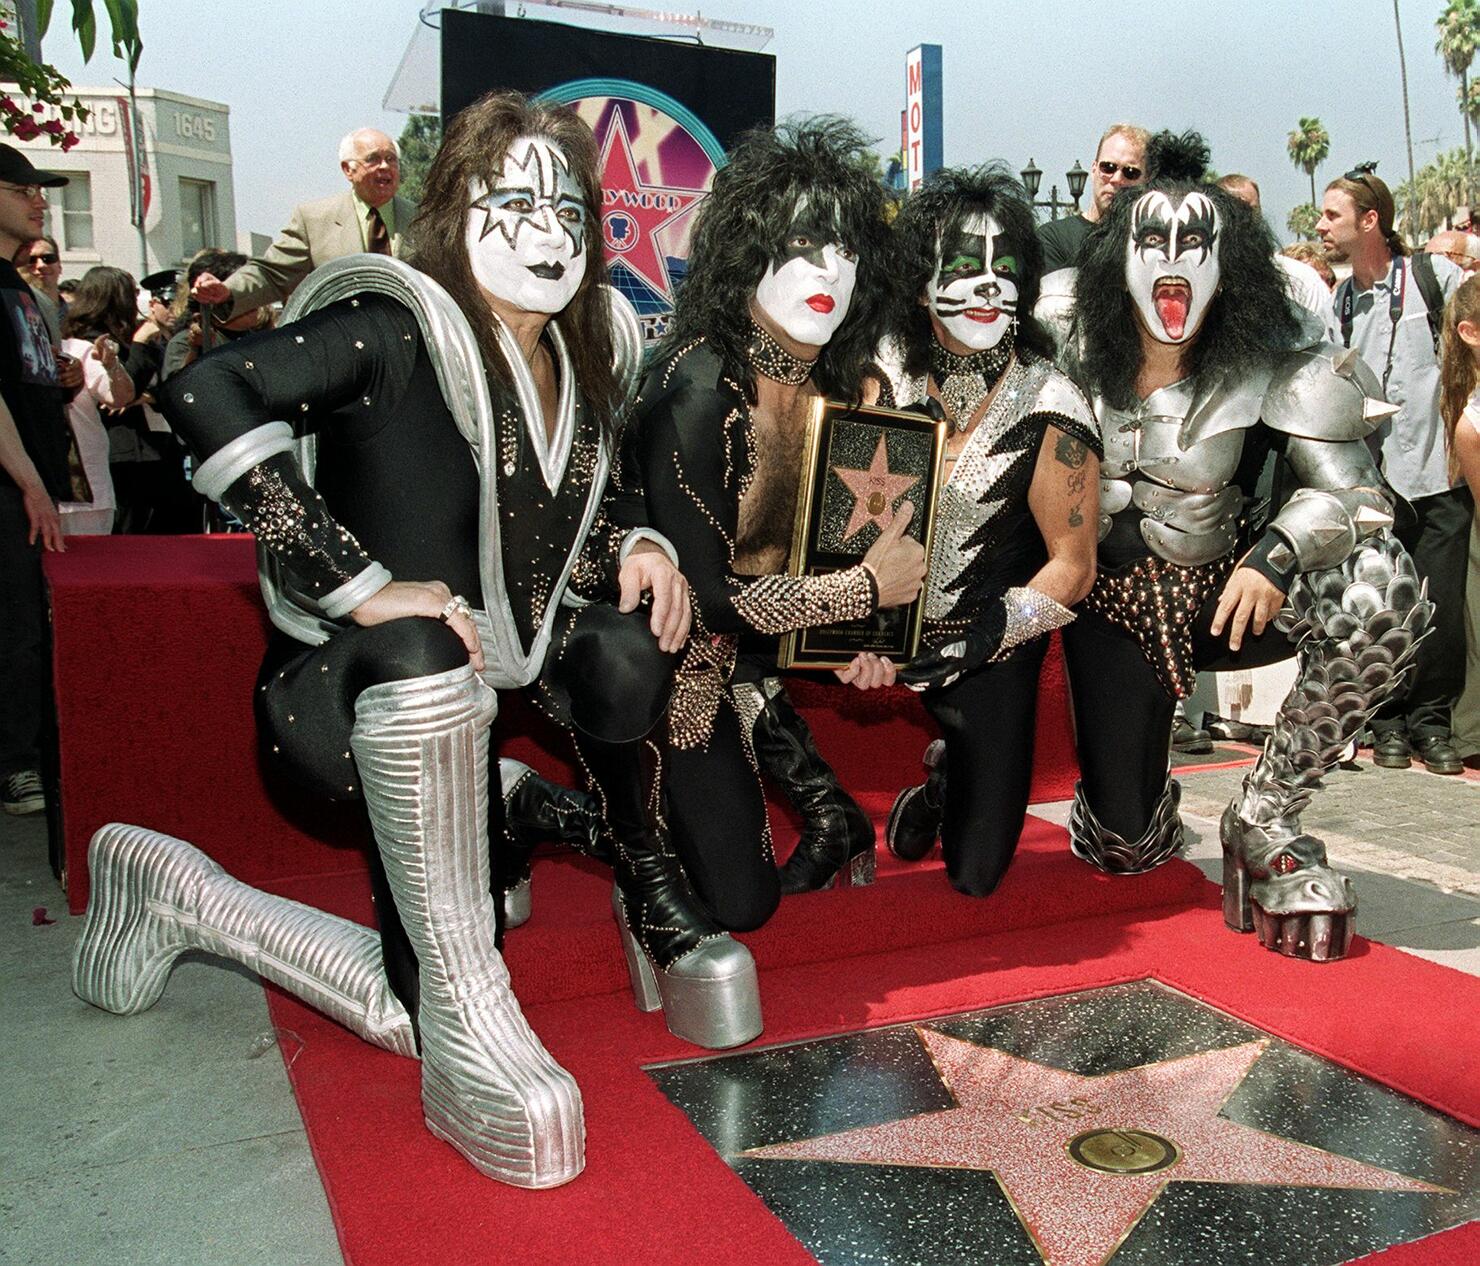 Members of the rock band Kiss (from left to right)